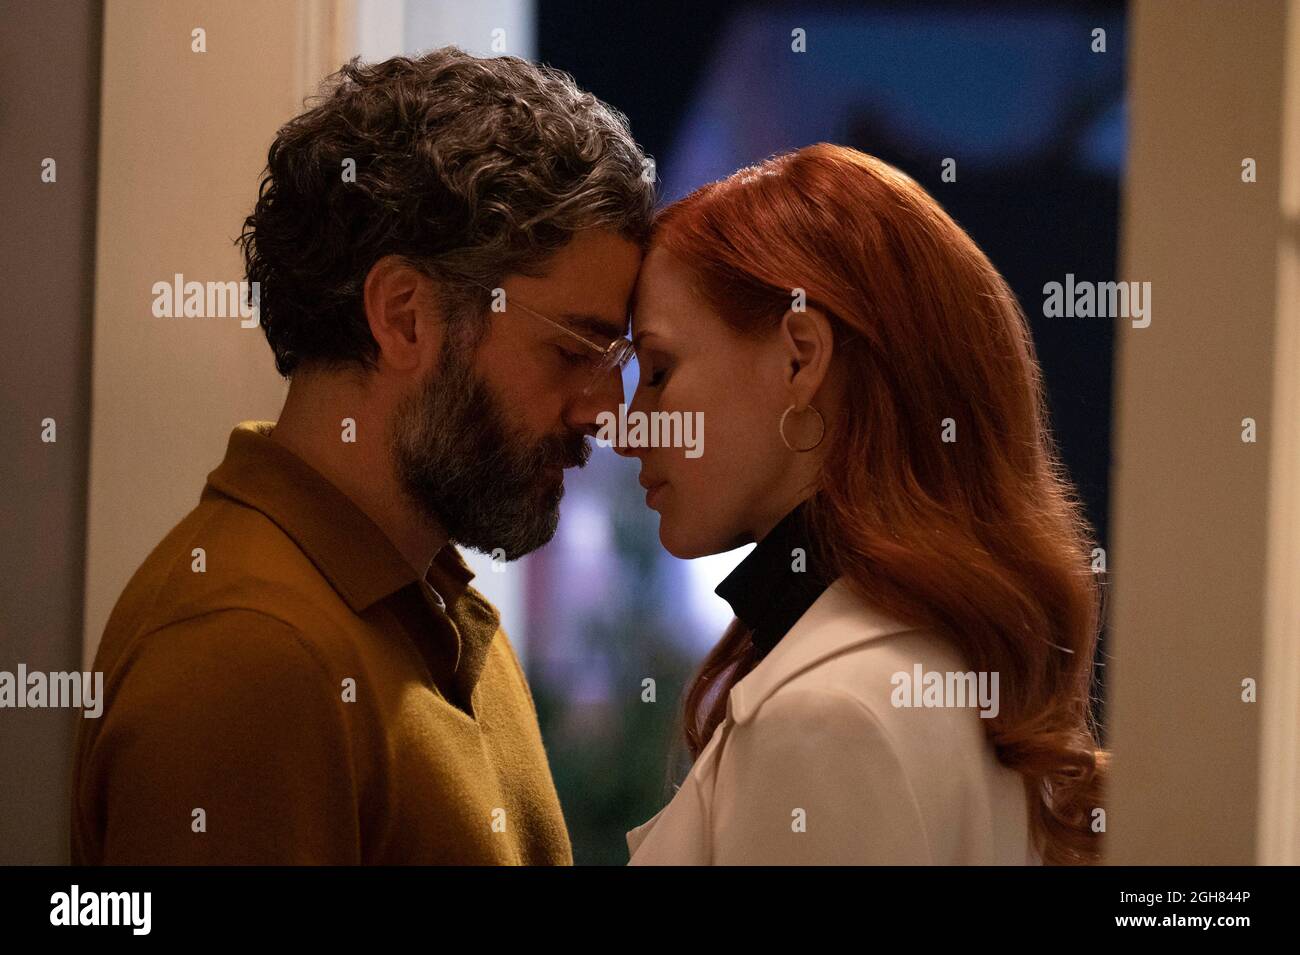 OSCAR ISAAC and JESSICA CHASTAIN in SCENES FROM A MARRIAGE (2021), directed by HAGAI LEVI. Credit: Endeavor Content / Album Stock Photo